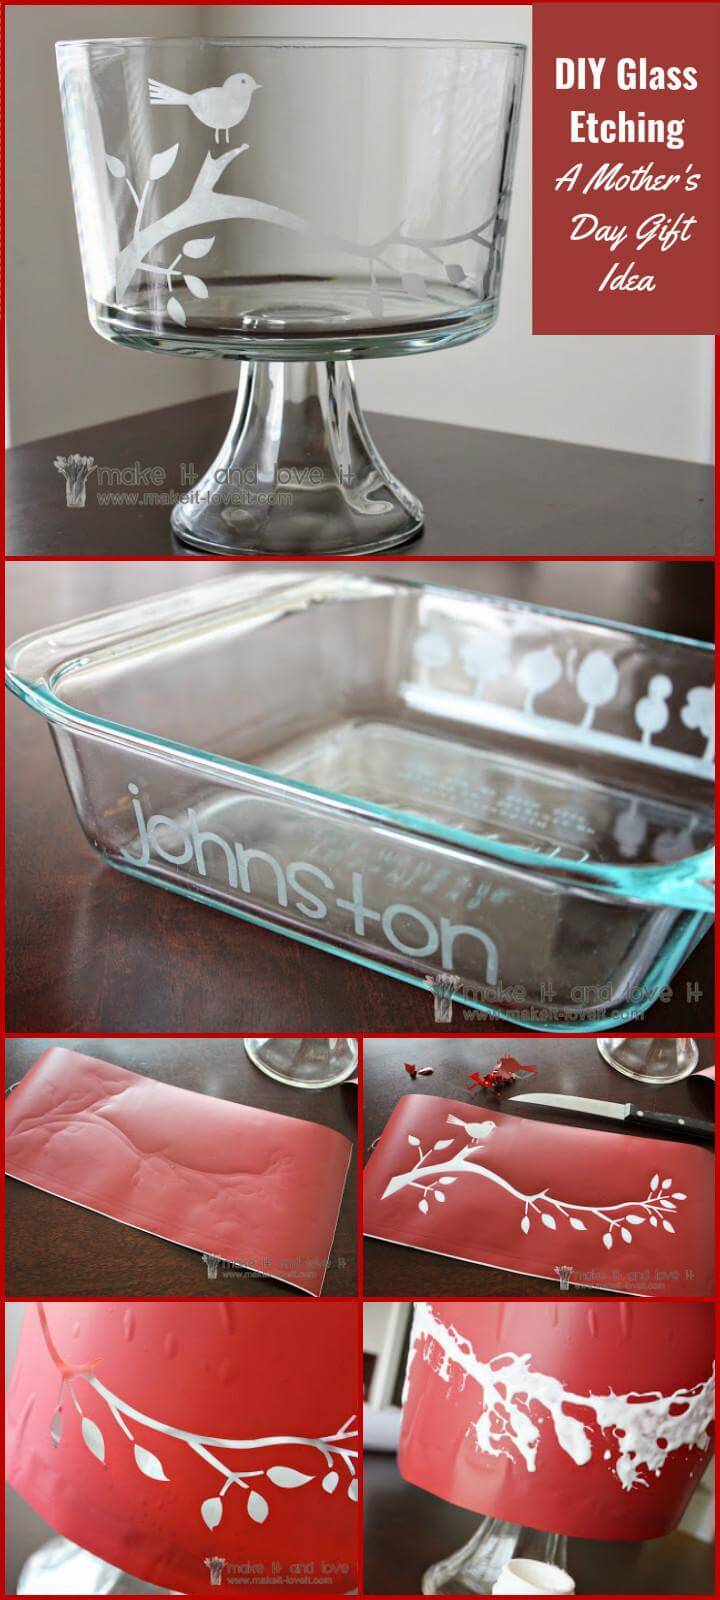 DIY glass etching Mother's Day gift project